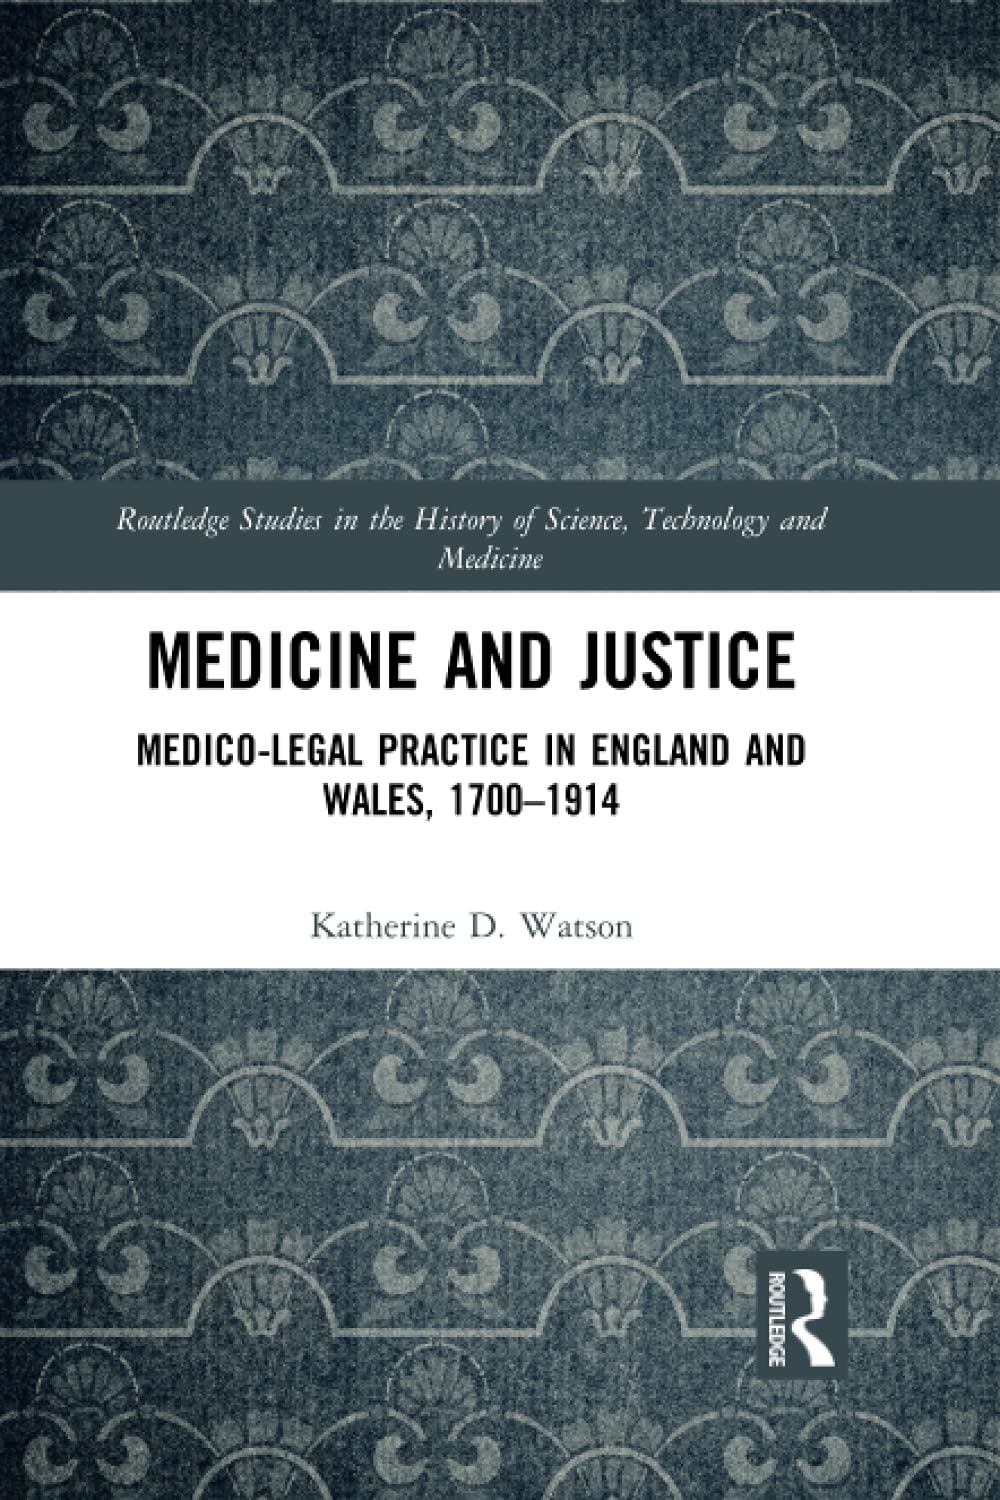 Medicine and Justice (Routledge Studies in the History of Science, Technology and Medicine)